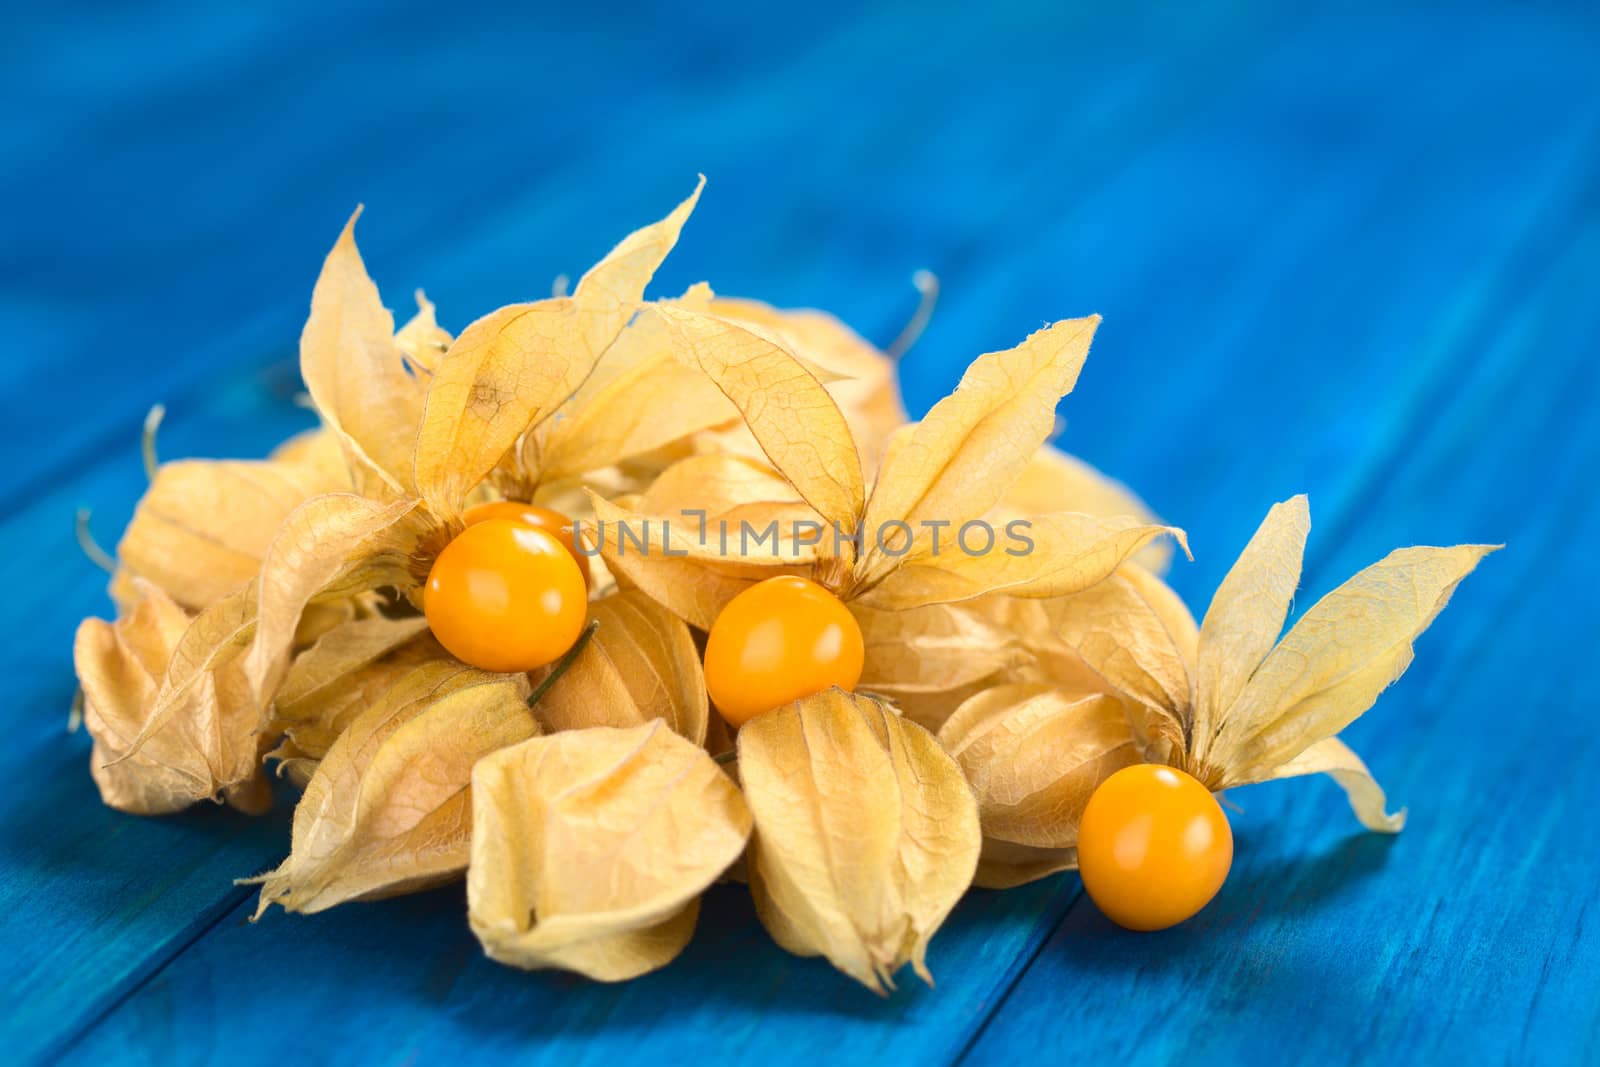 Physalis berry fruits (lat. Physalis peruviana) with husk on blue wood (Selective Focus, Focus on the open physalis berries)